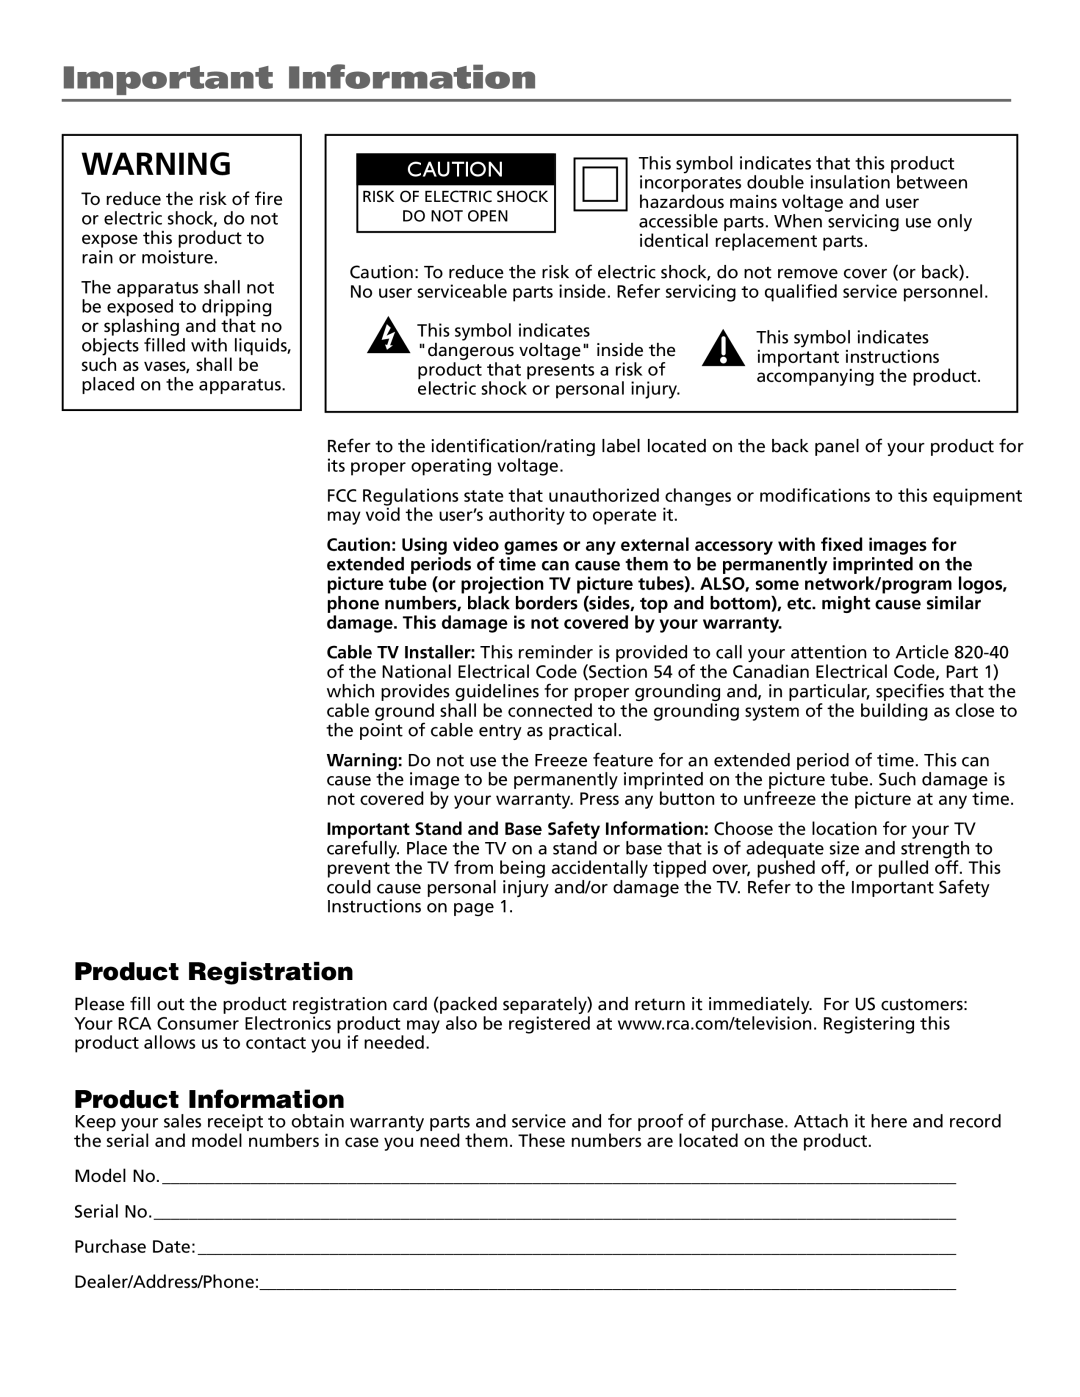 RCA R52WH79 manual Important Information, Product Registration, Product Information 